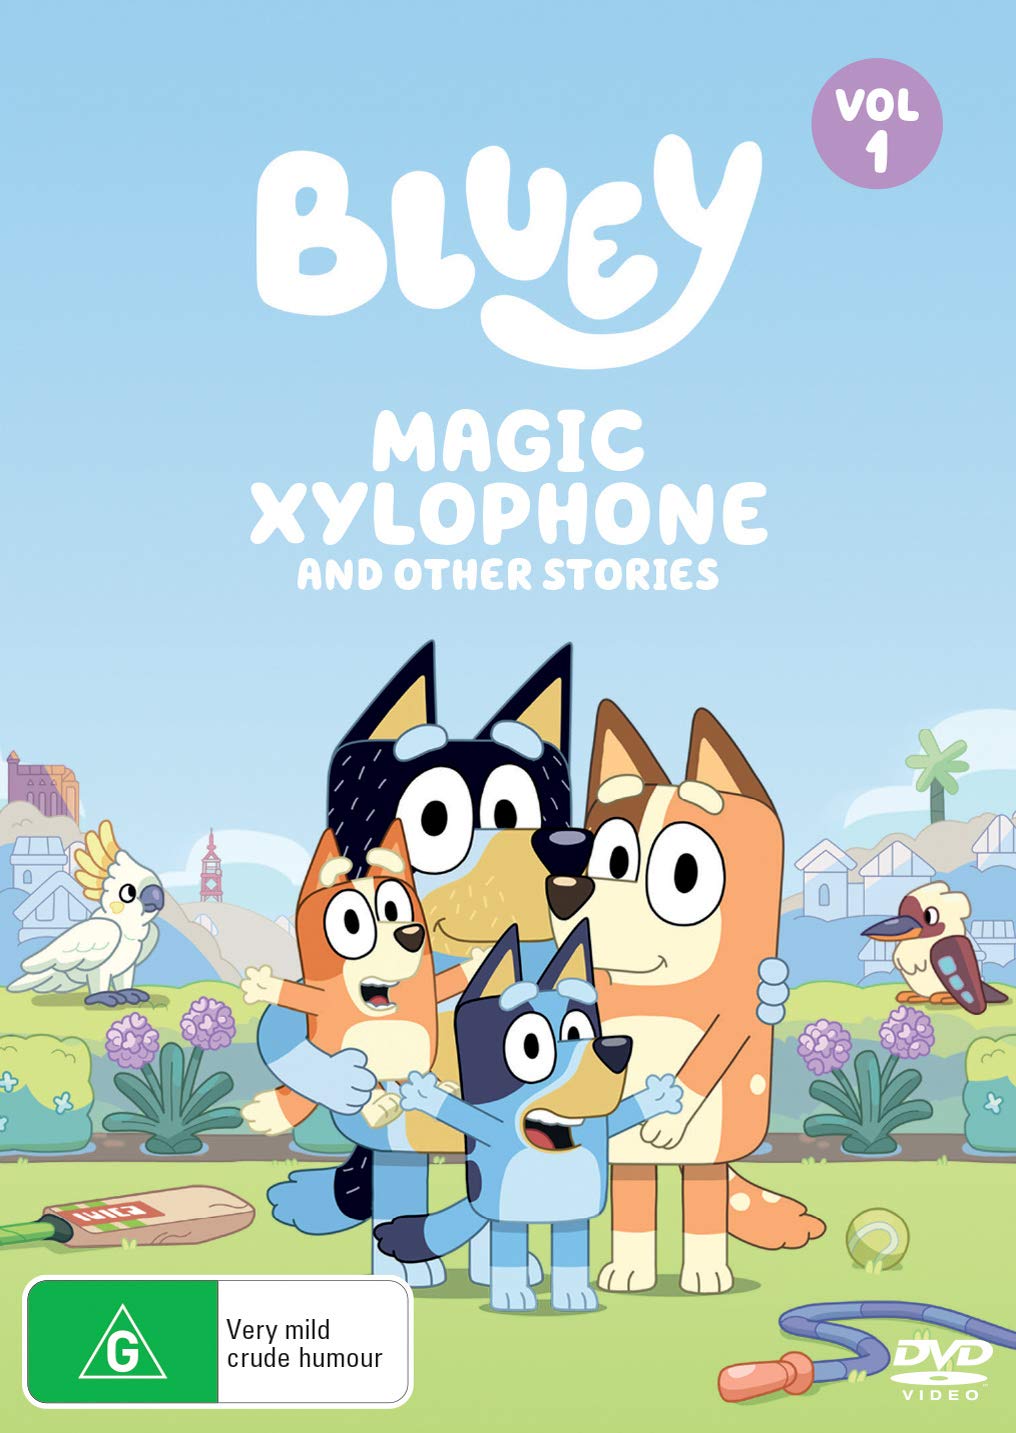 Bluey: Magic Xylophone And Other Stories Vol 1 (DVD) | Bluey Wiki | Fandom